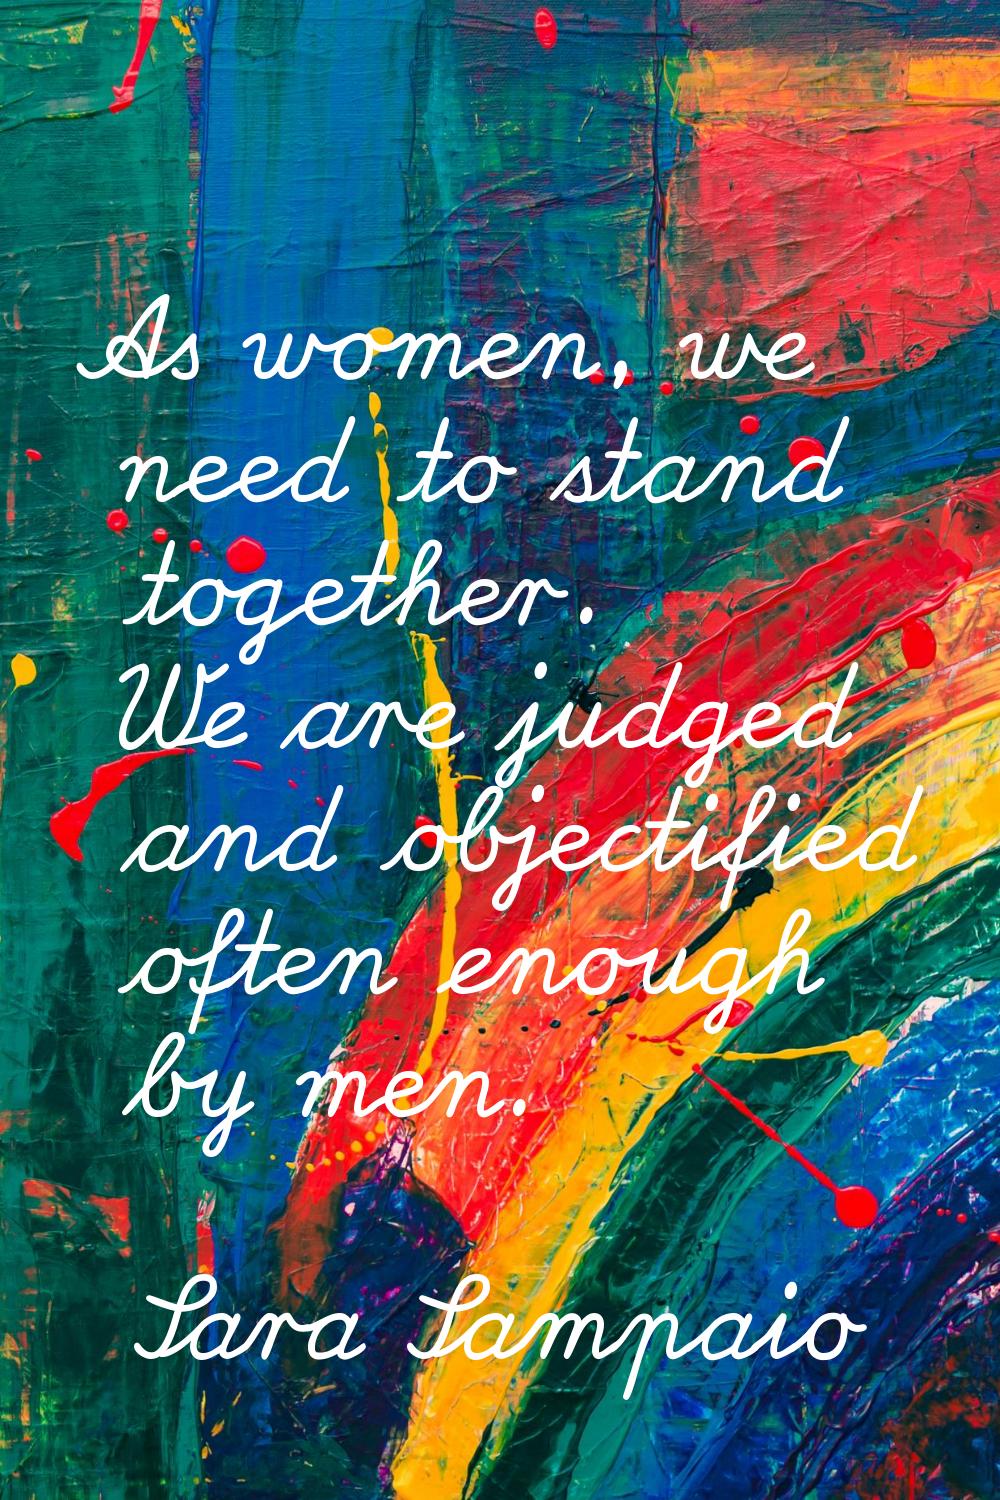 As women, we need to stand together. We are judged and objectified often enough by men.